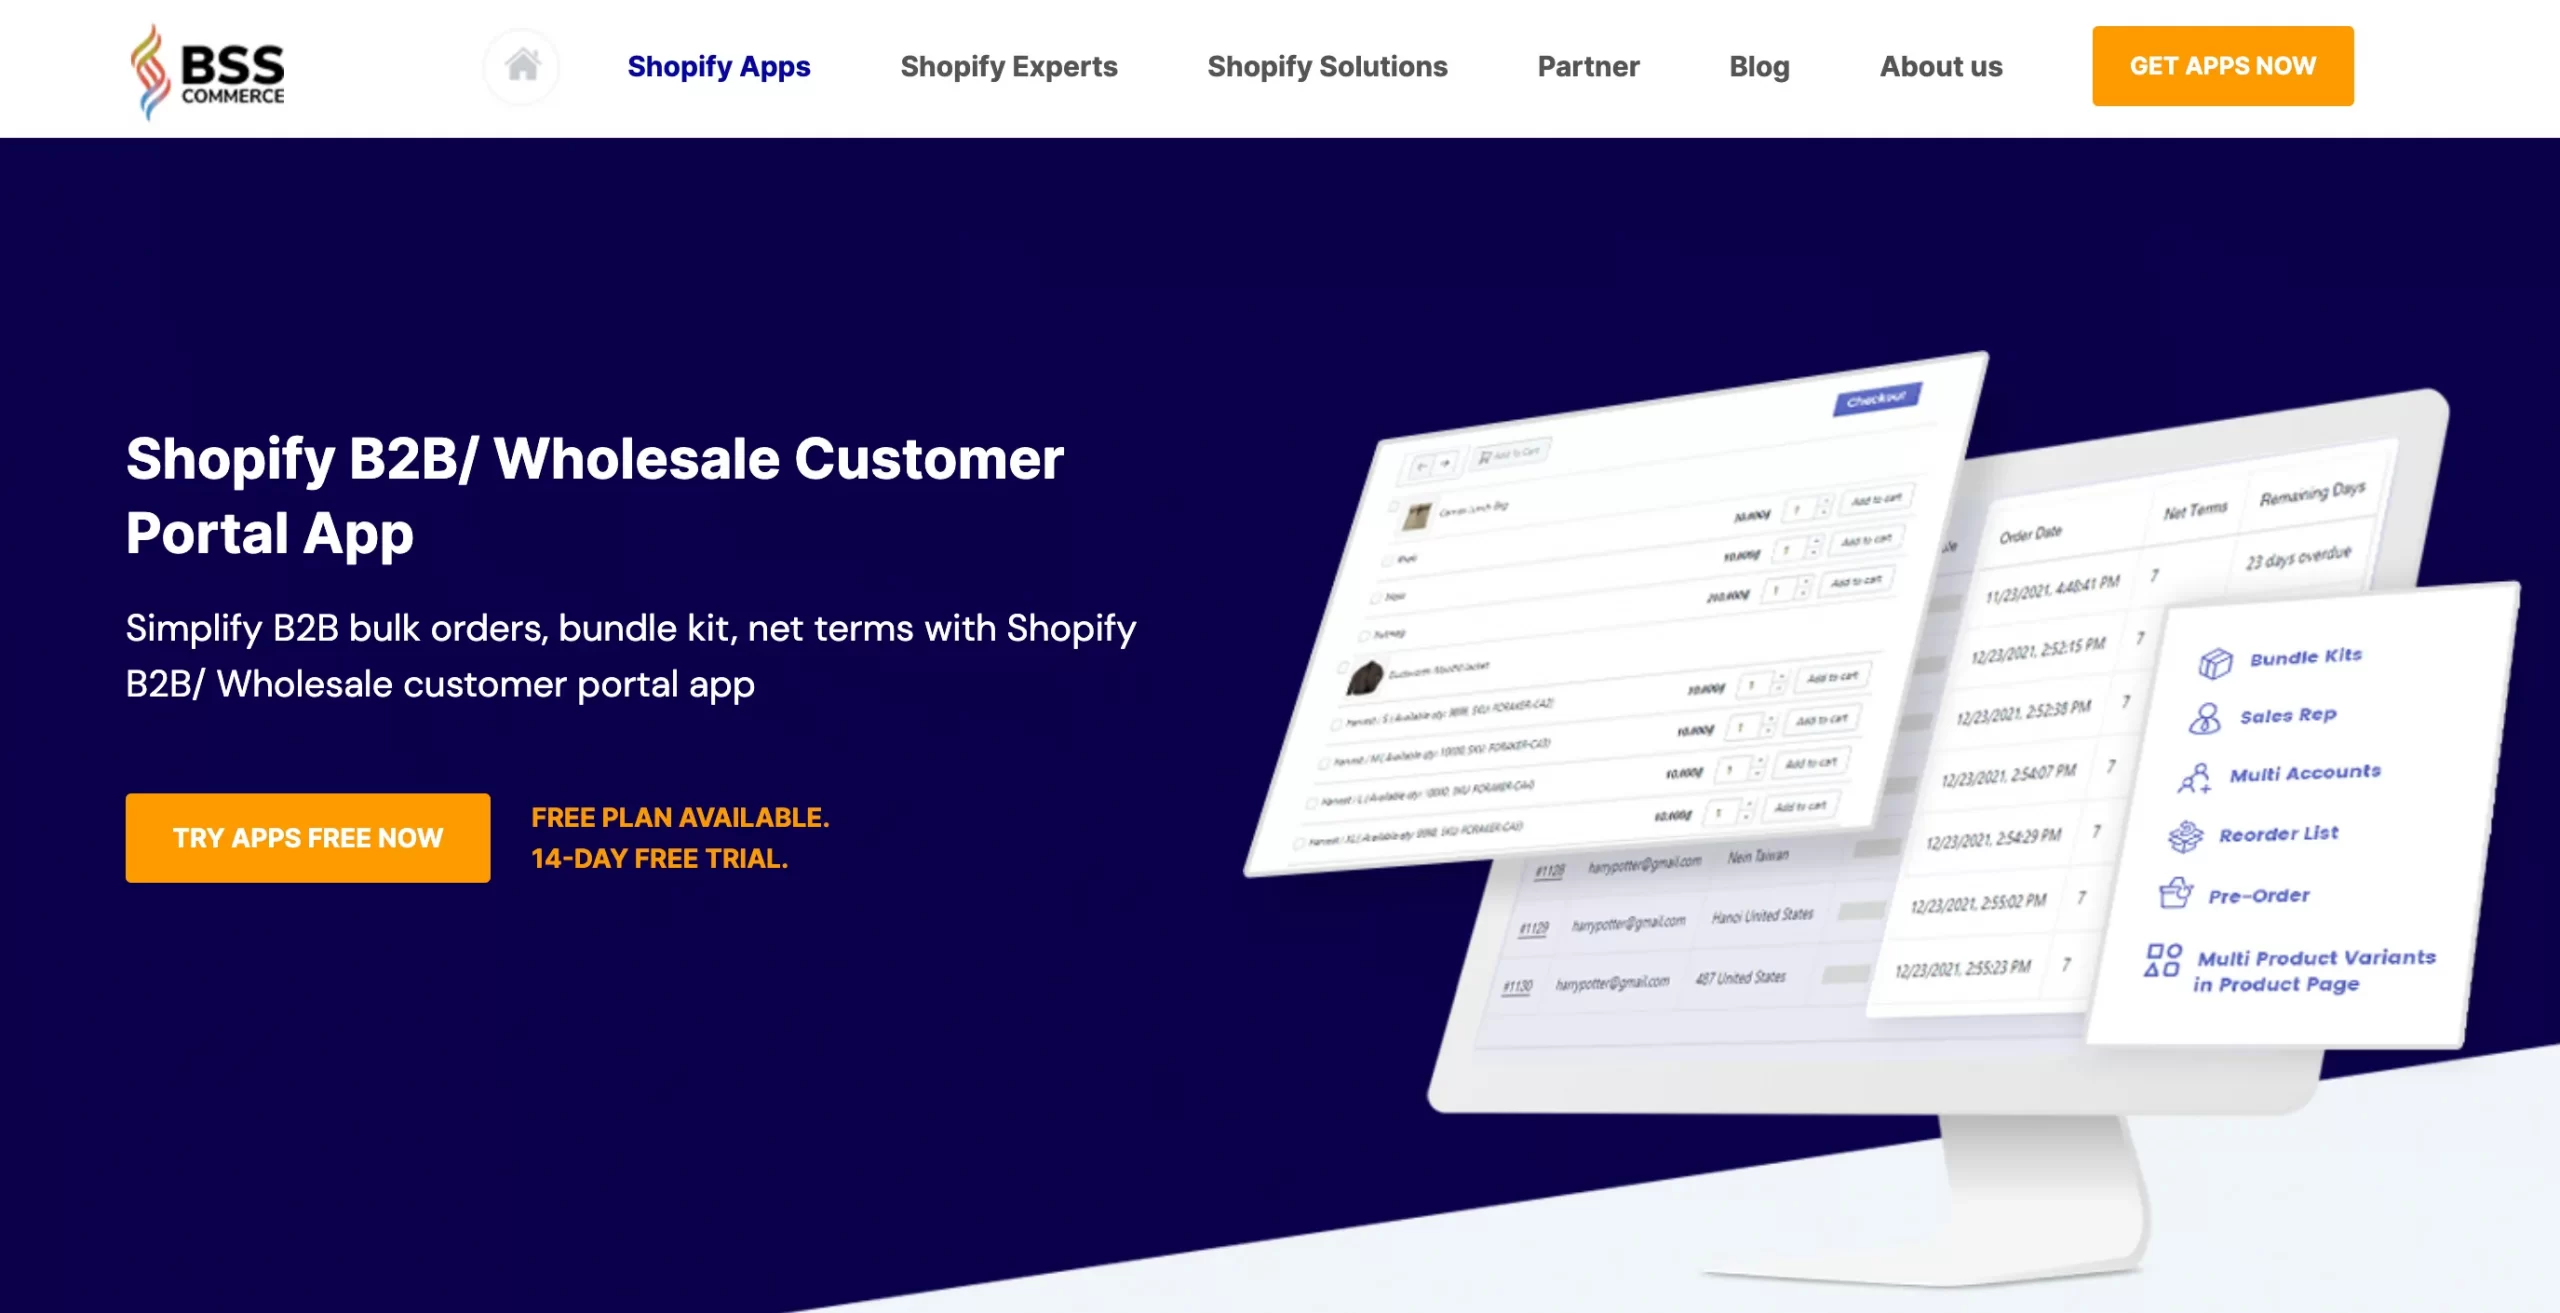 best shopify wholesale apps: B2B/Wholesale Solution from BSS Commerce